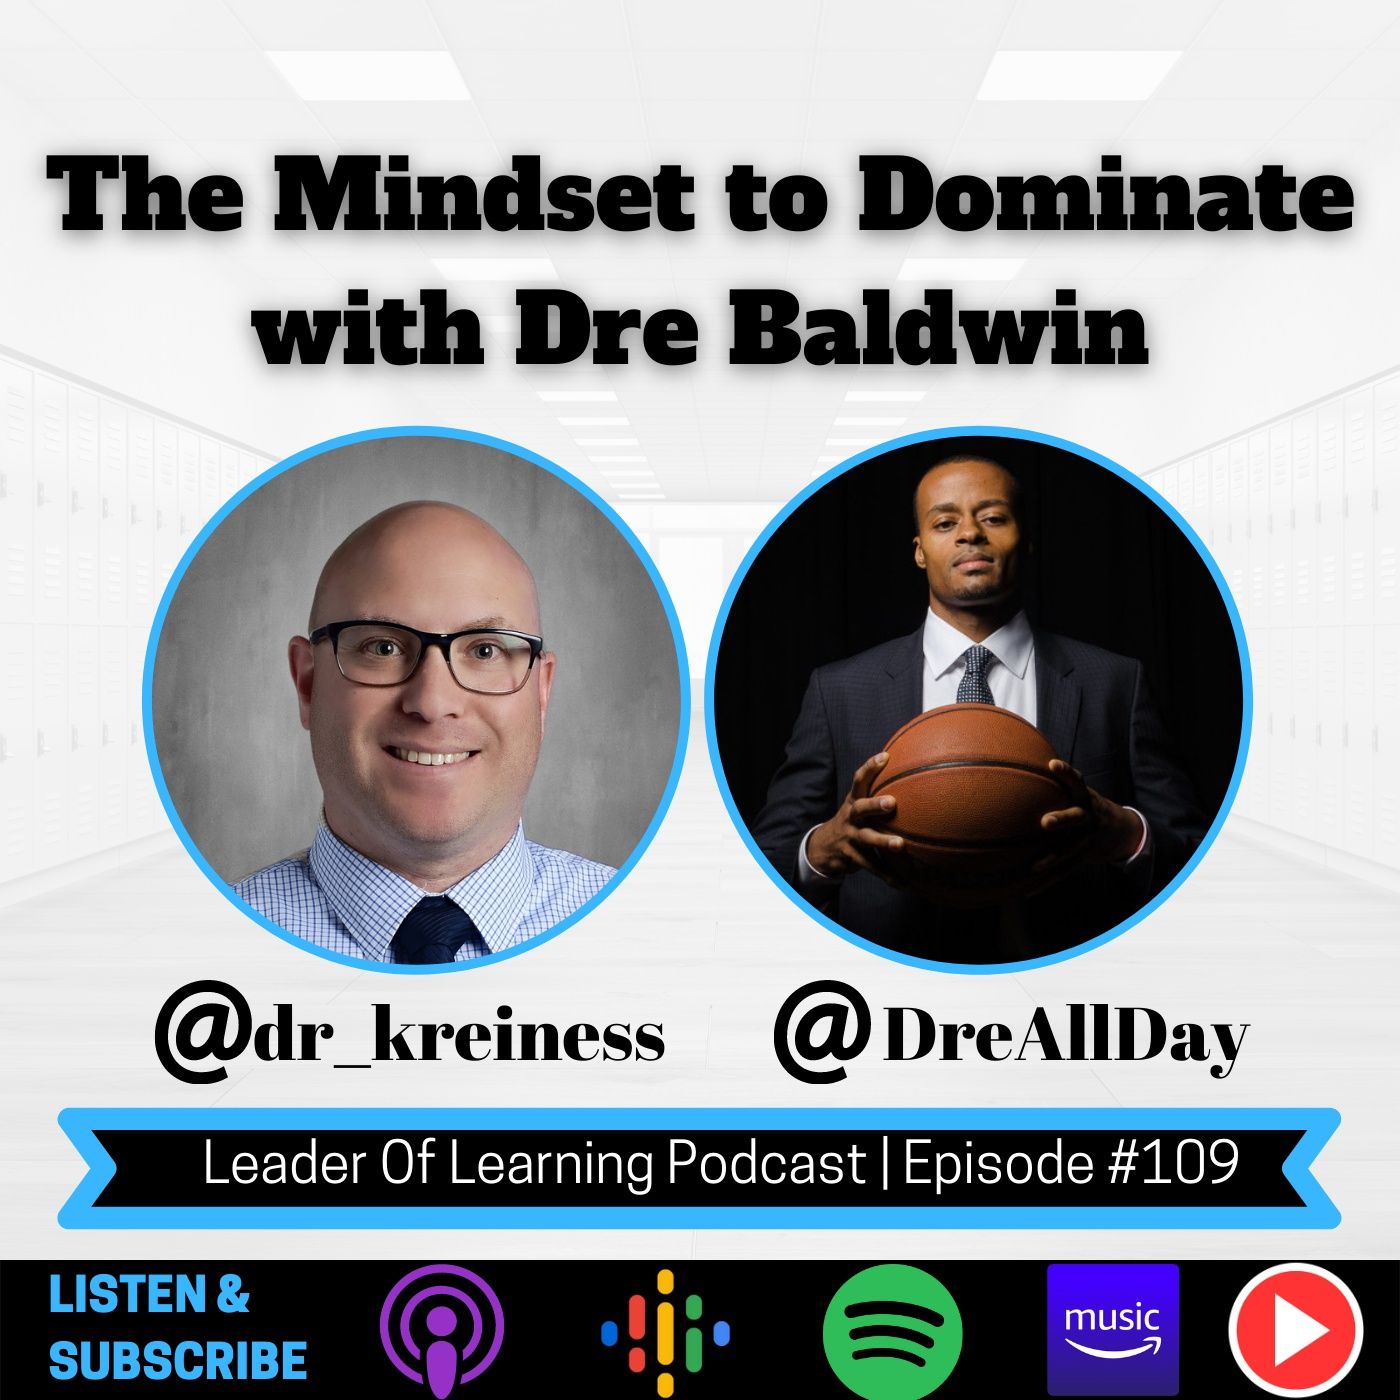 The Mindset to Dominate with Dre Baldwin Image